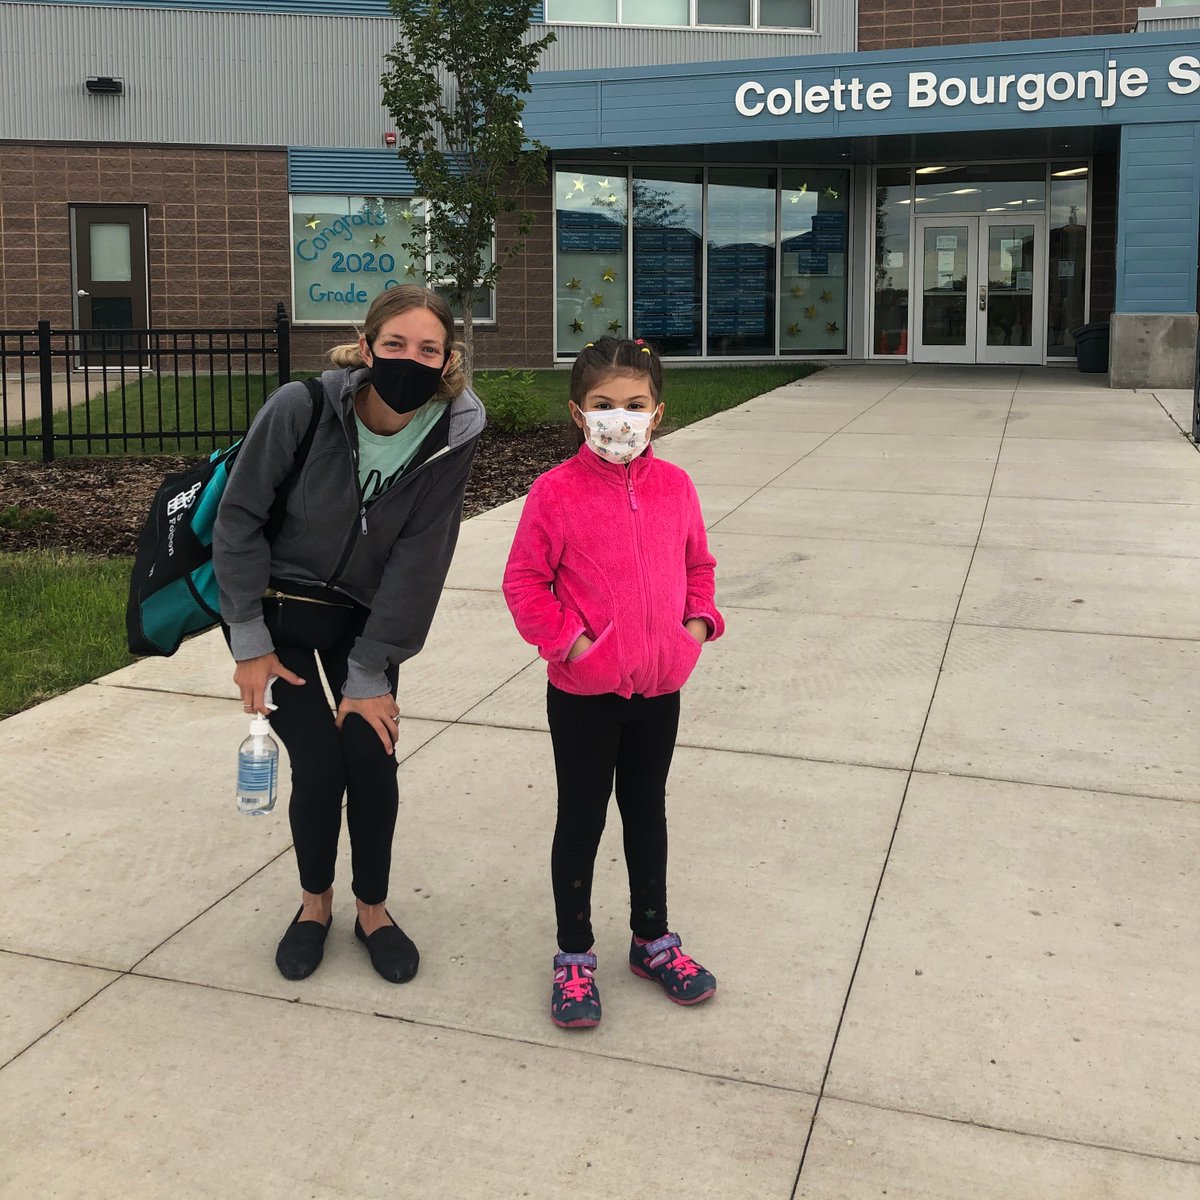 Saskatoon Public Schools will be requiring students in grades 4-12 to wear a mask in schools where it is not possible to maintain physical distancing. Masks will be recommended for prekindergarten – gr. 3 students in schools. Masks will be required for all students on buses.